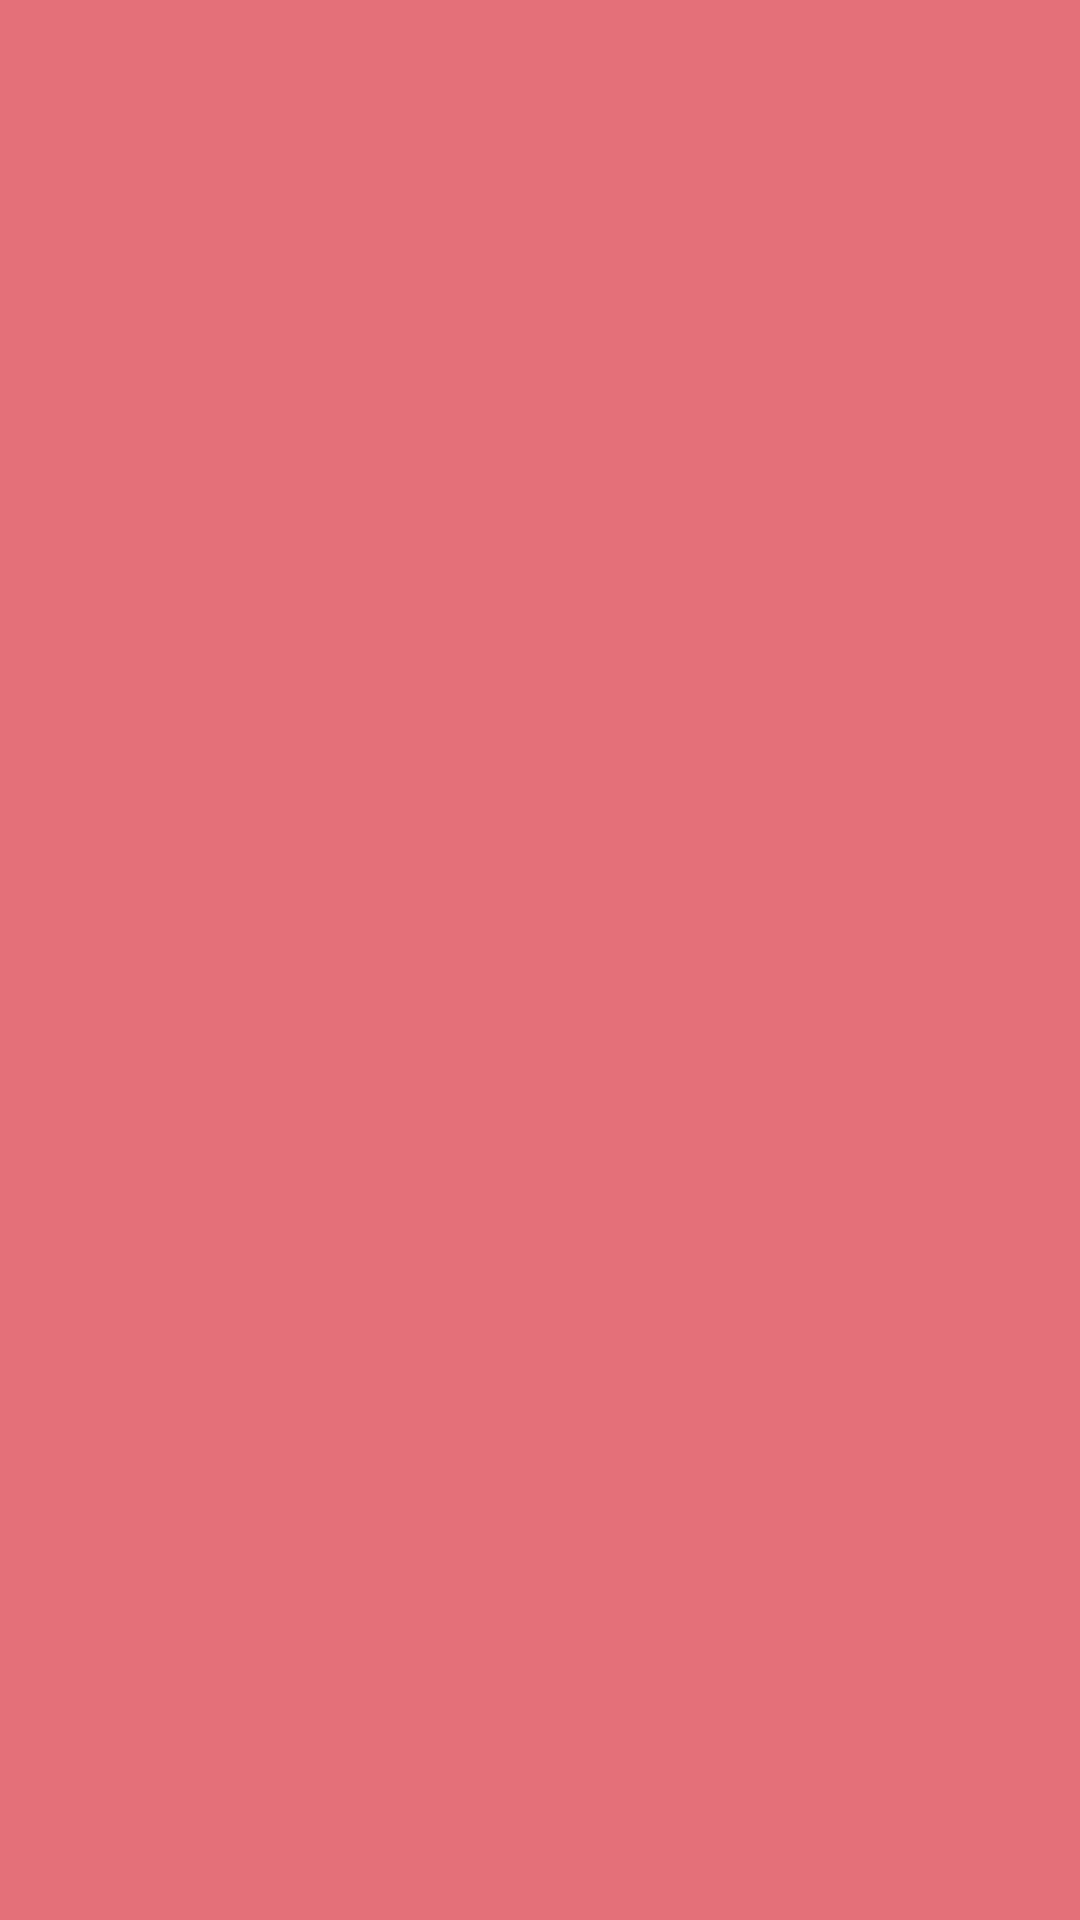 1080x1920 Candy Pink Solid Color Background